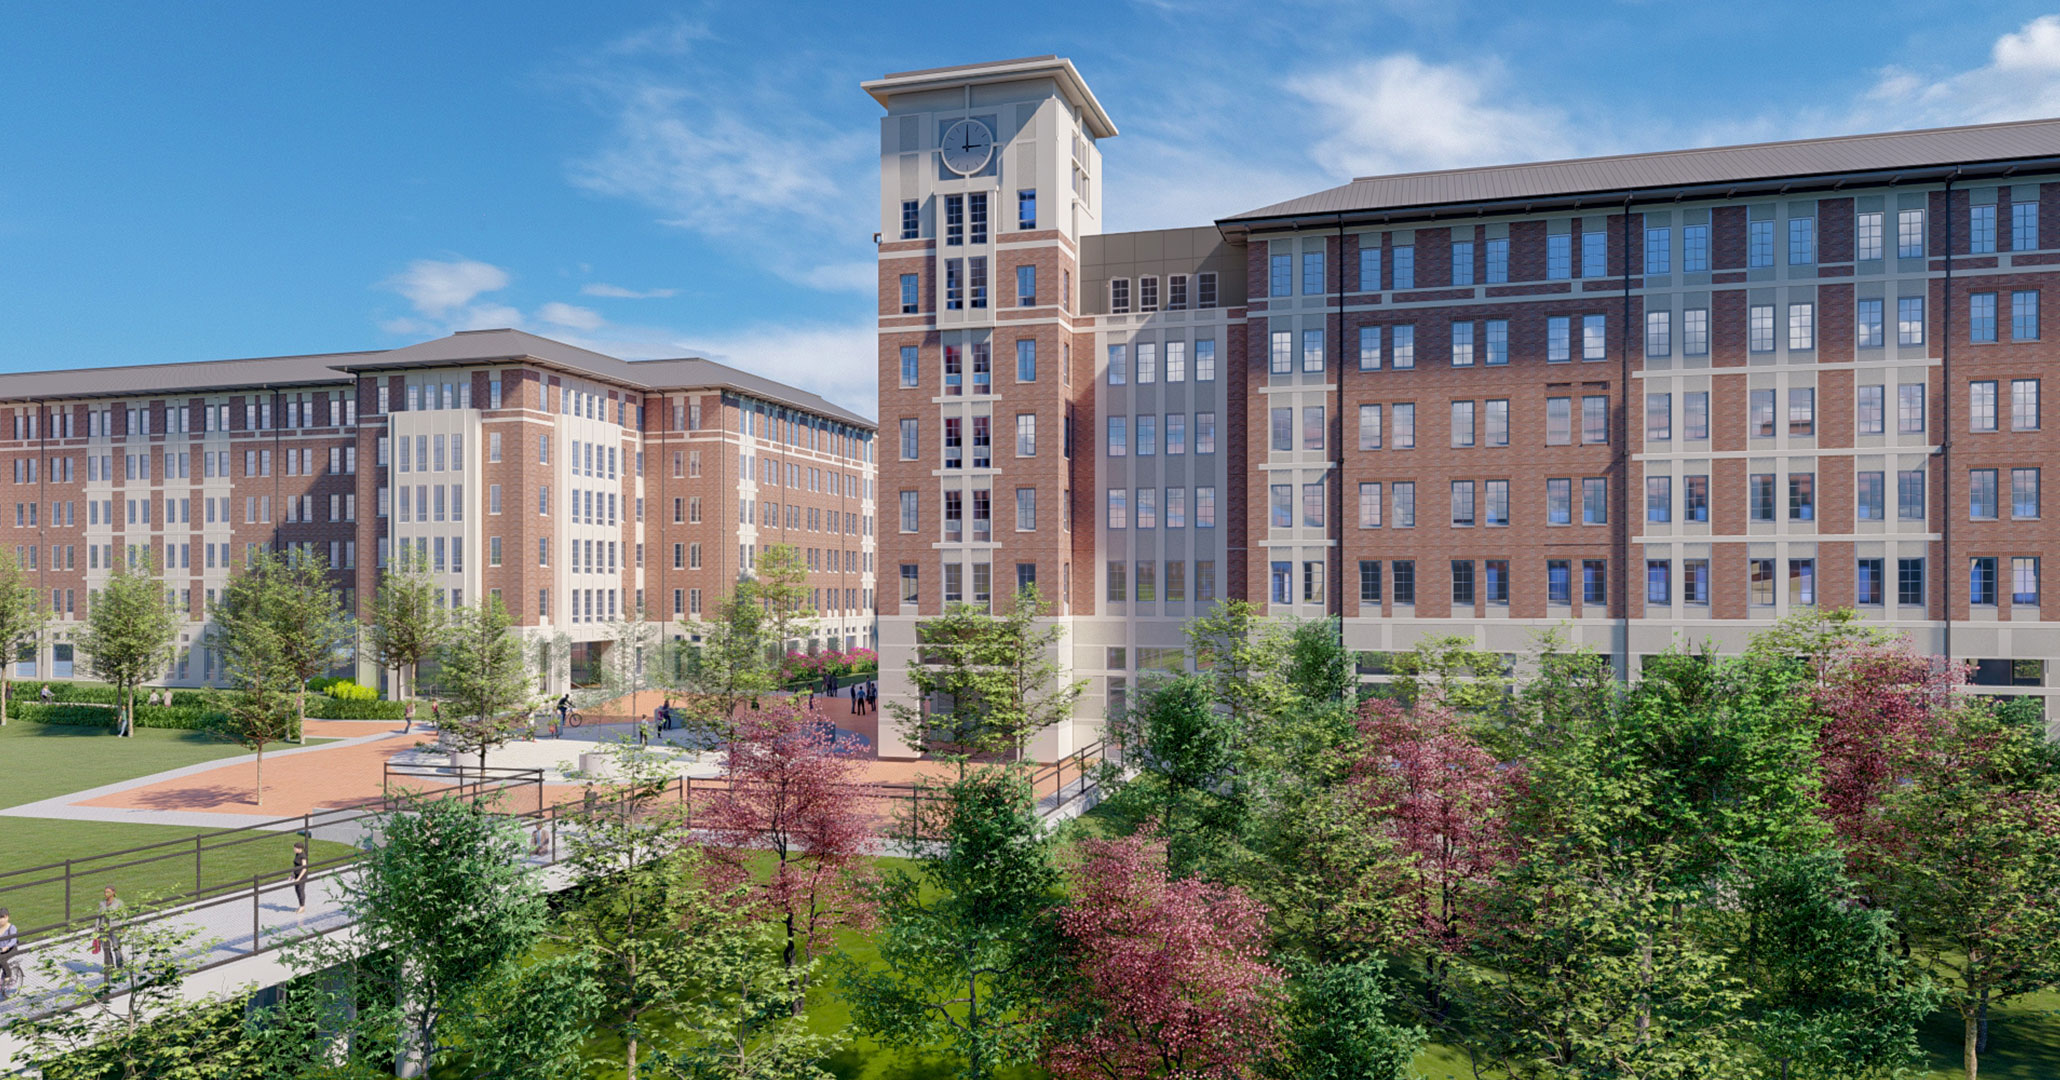 Boudreaux architects is working with UofSC on the new Campus Village development.